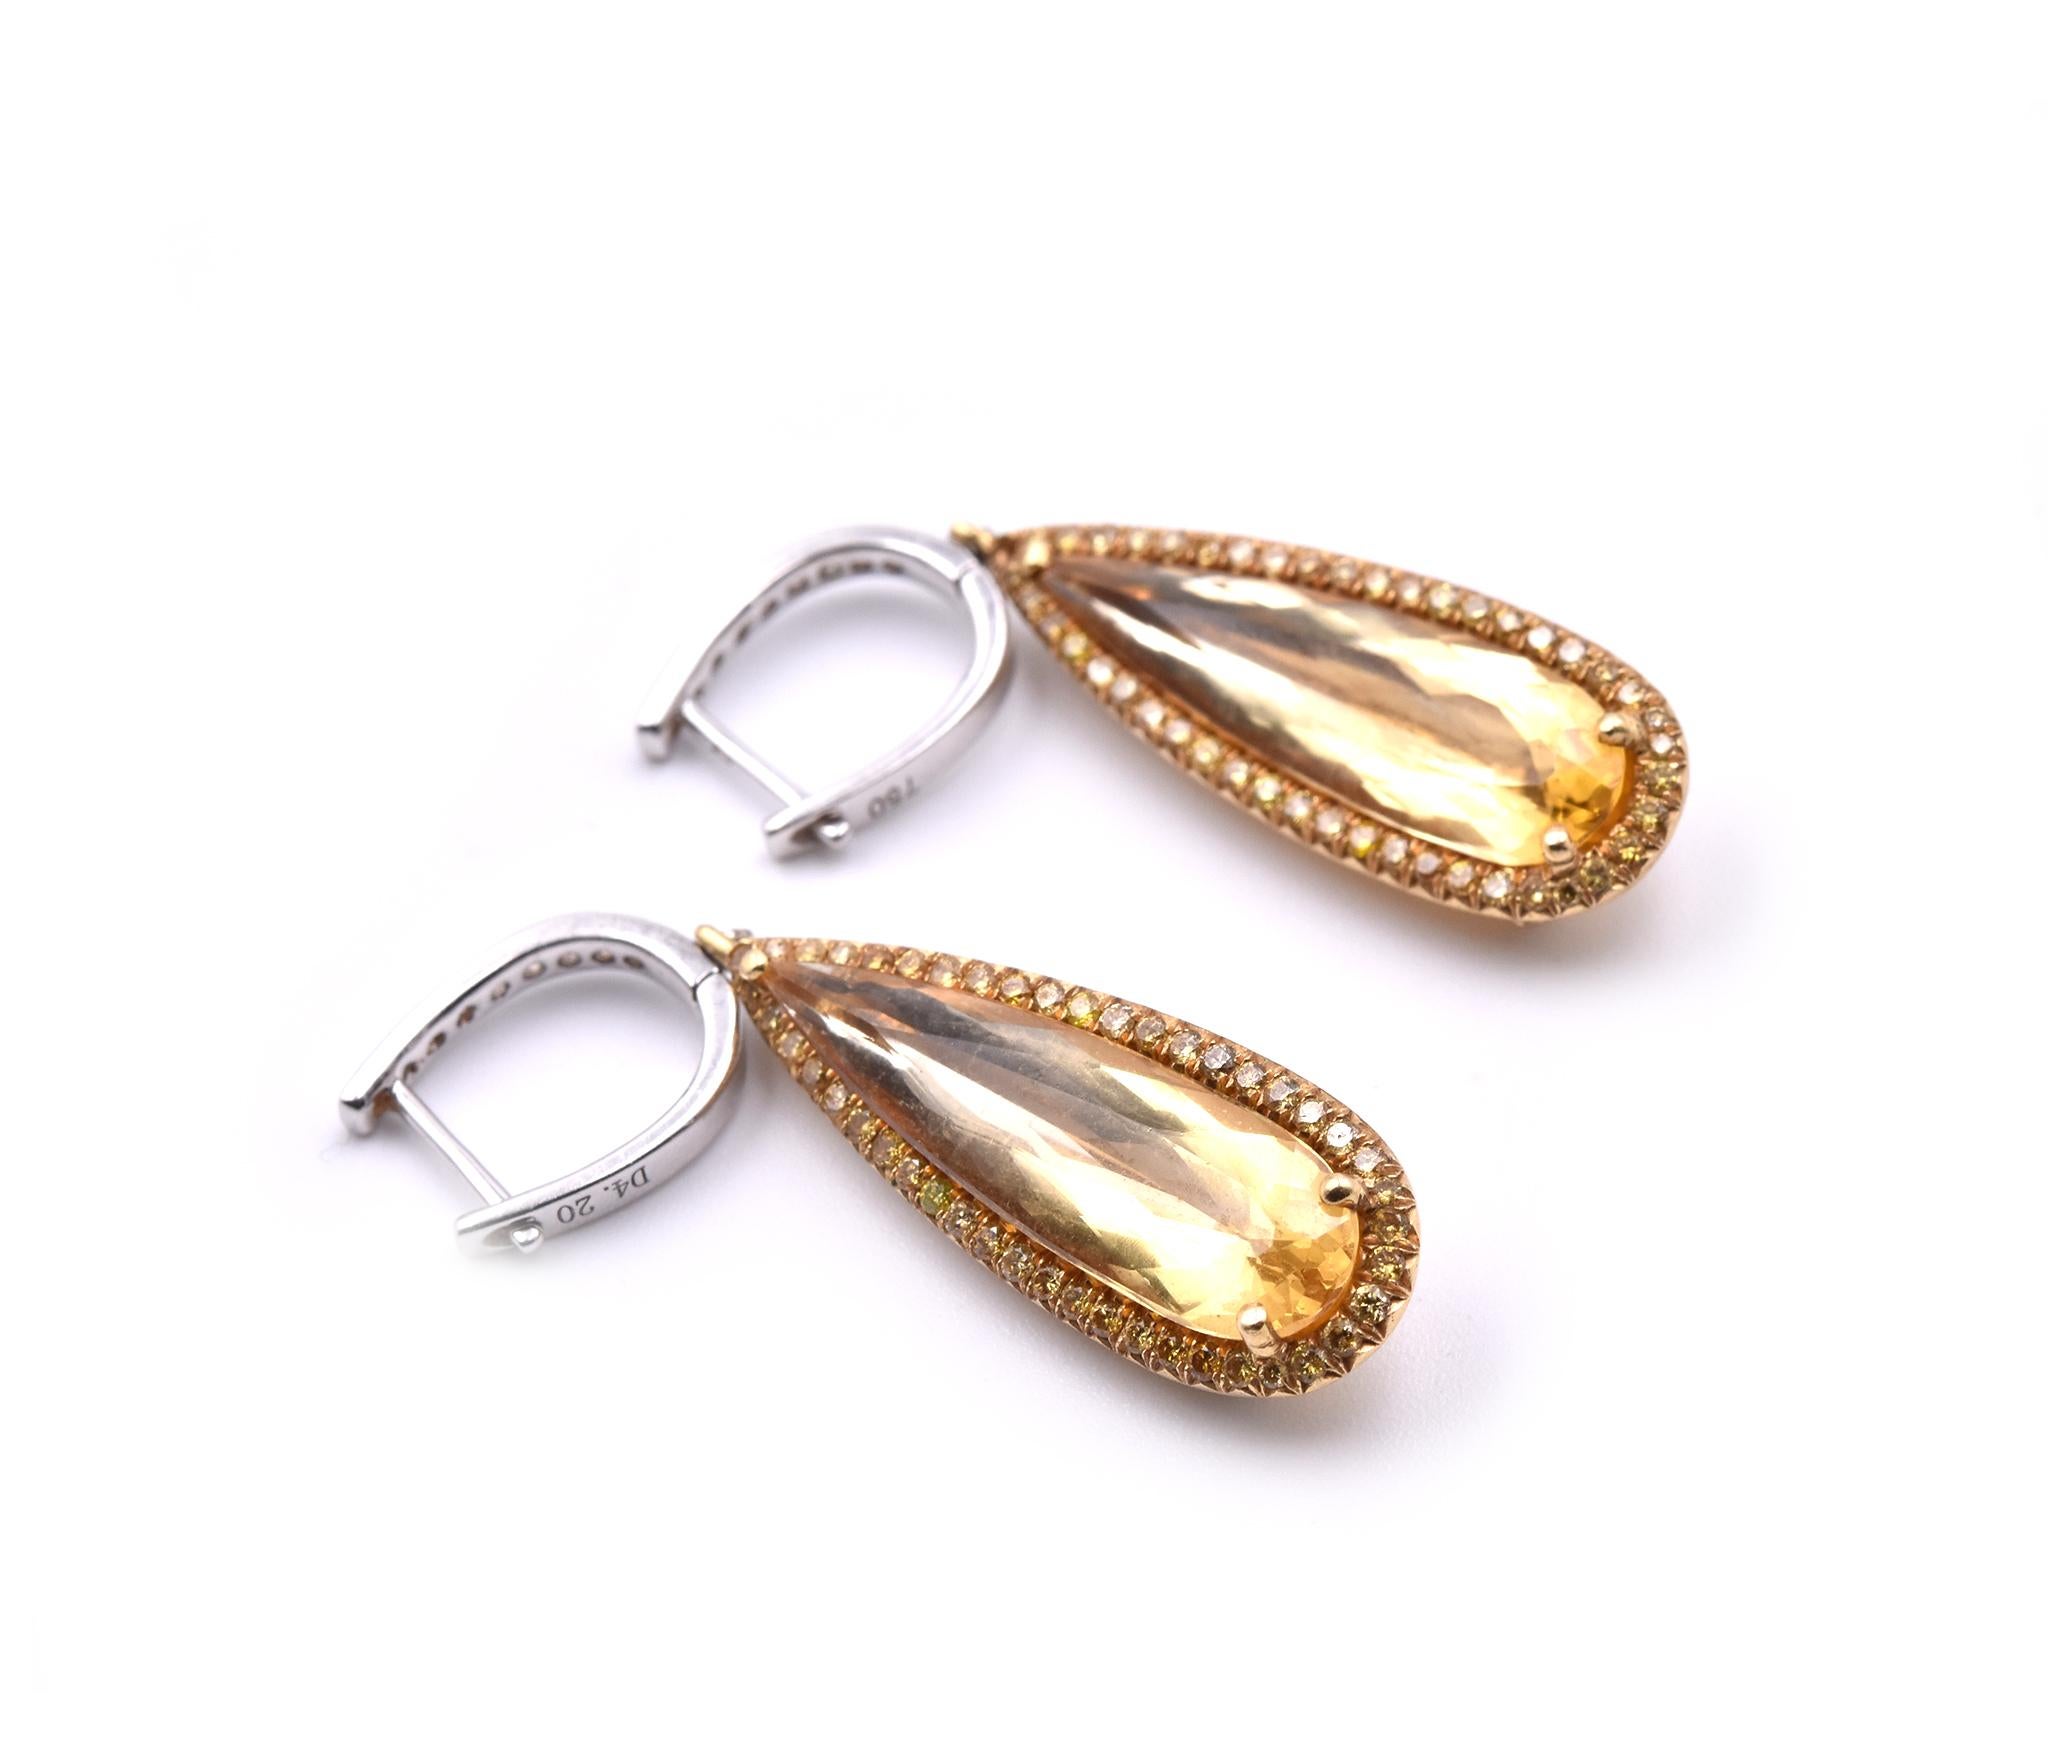 Designer: custom design
Material: 18k yellow and white gold
Diamonds: 106 round brilliant cut= 2.12cttw
Color: G
Clarity: VS
Fastenings: huggie style
Dimensions: earrings are approximately 40.70mm long and 9.86mm wide
Weight: 8.58 grams
